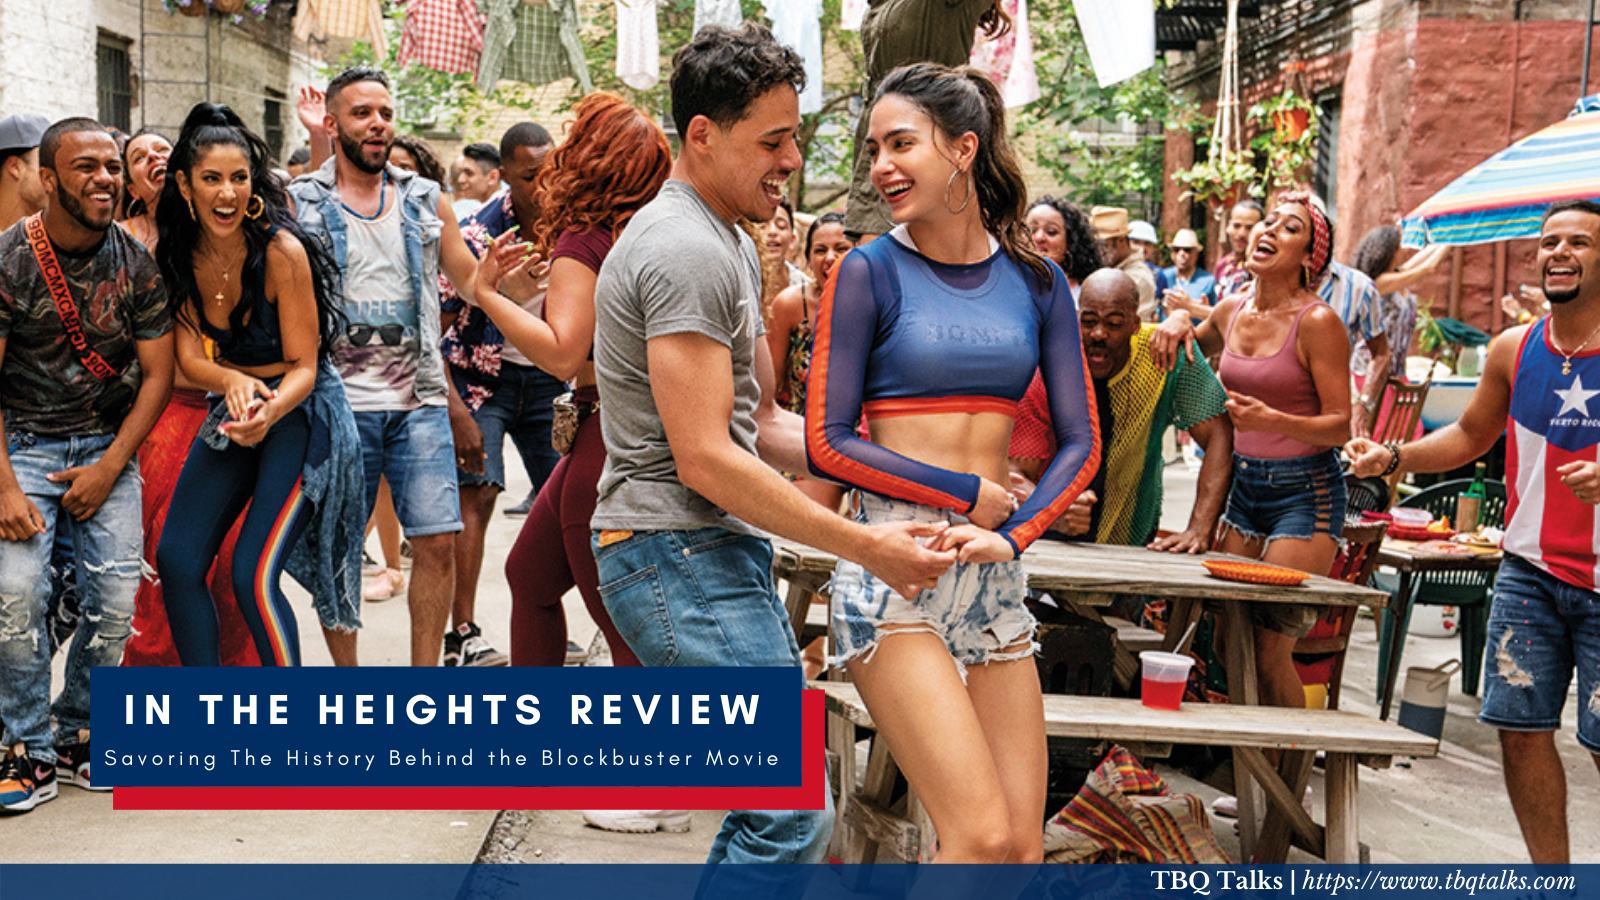 In the Heights Review: Savoing the History Behind the Blockbuster Movie